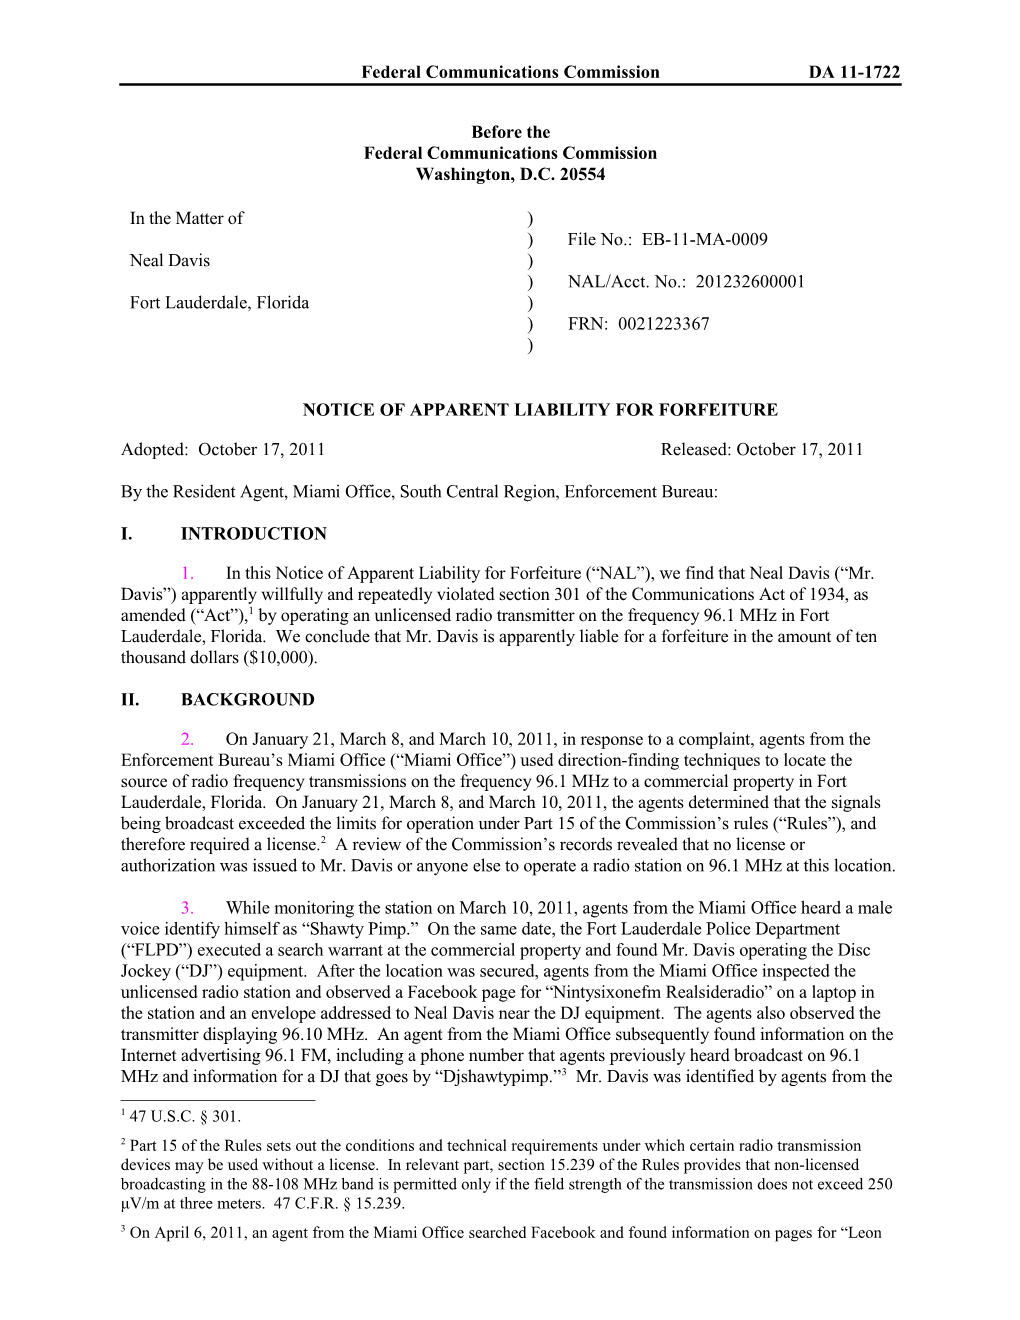 Notice of Apparent Liability for Forfeiture s17